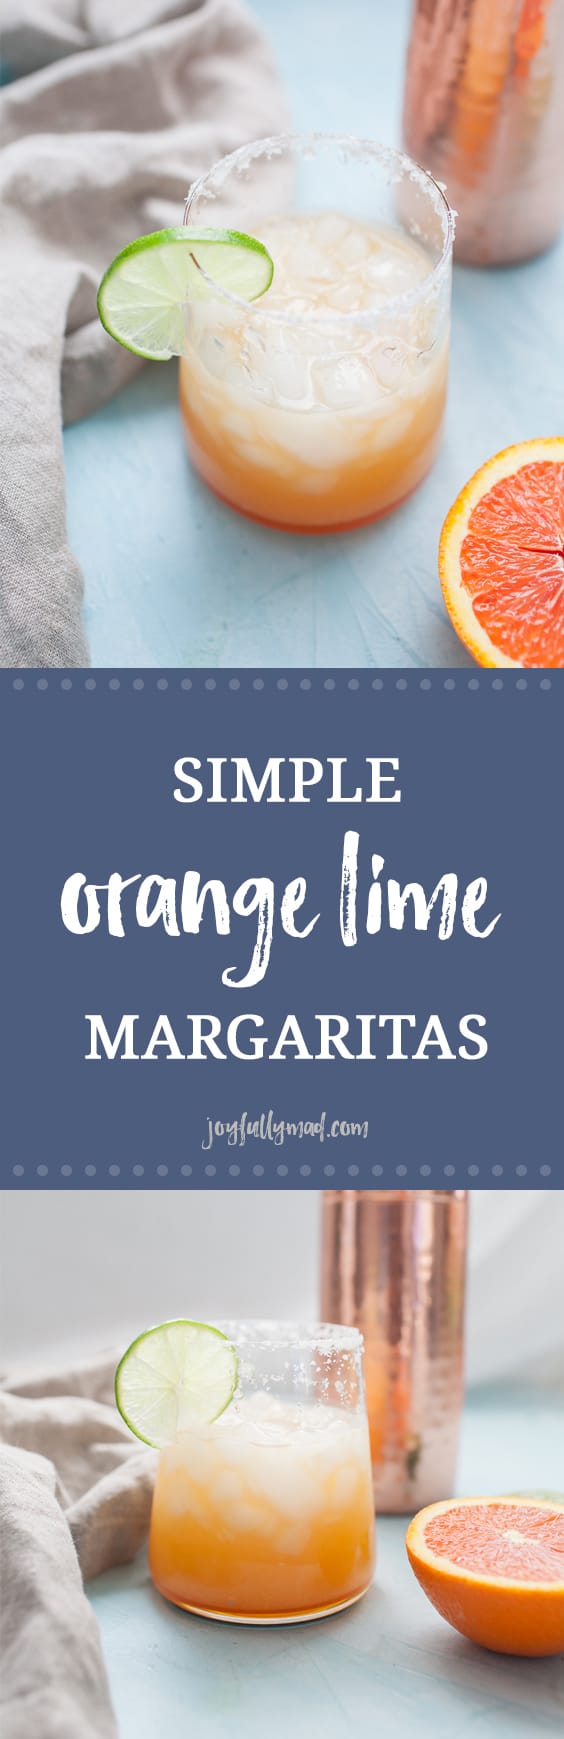 With Cinco de Mayo around the corner, these Simple Orange Lime Margaritas are perfect to have on your menu. They are made with fresh squeezed orange juice, lime juice, triple sec and tequila for a simple, flavorful and fun margarita recipe! This is a twist on a classic margarita recipe that you're definitely going to want to try.